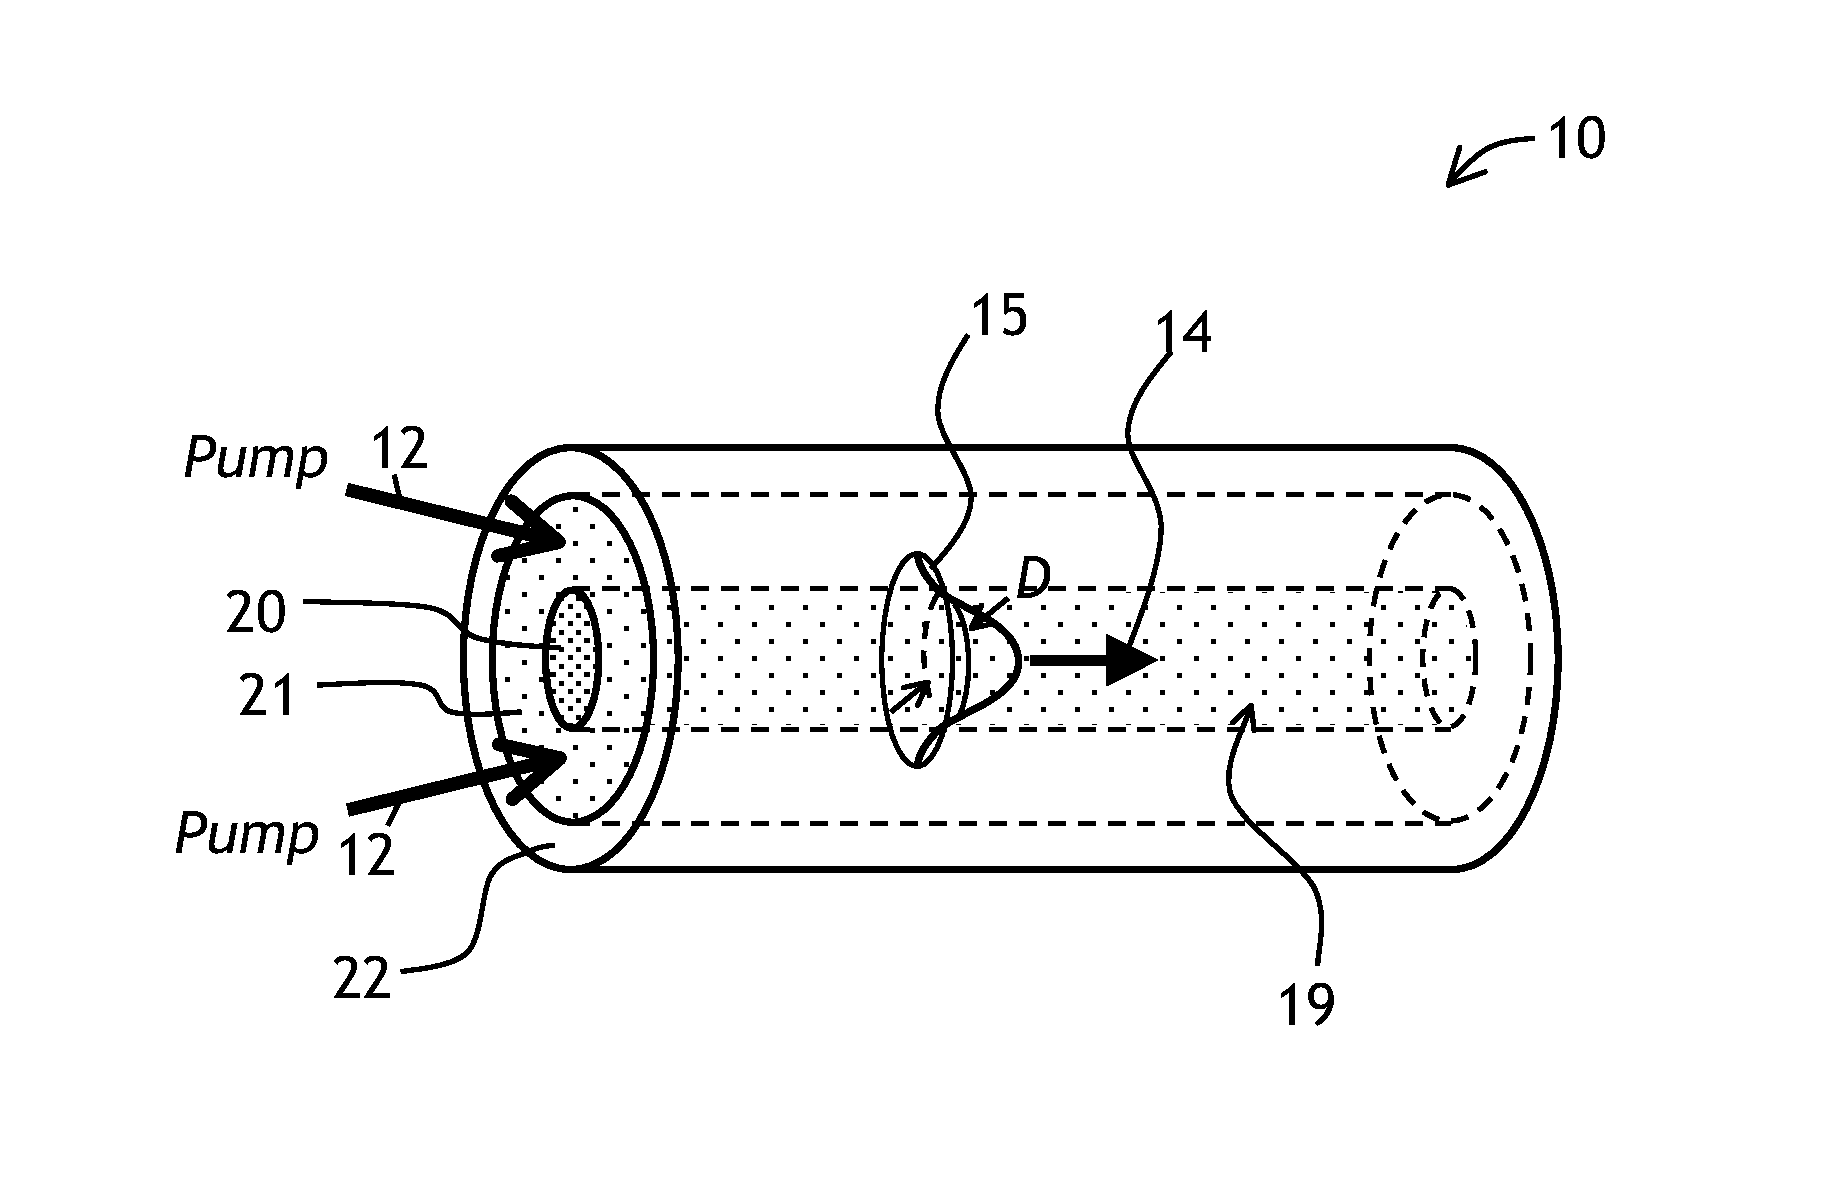 Large mode area optical waveguide devices